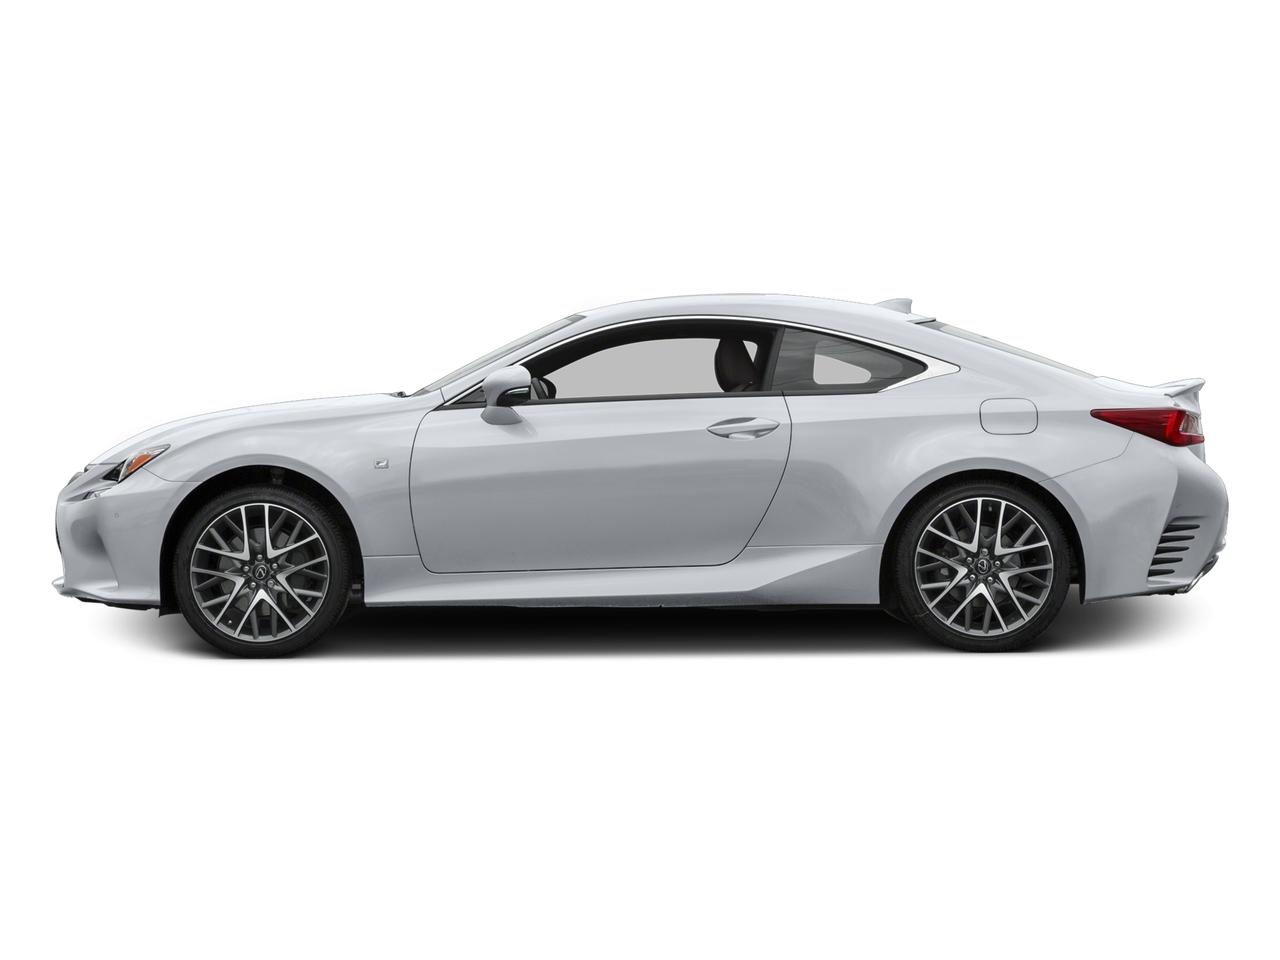 Used 2016 Lexus RC 300 F SPORT in White for sale in CLEVELAND, Mississippi  - PH3519A